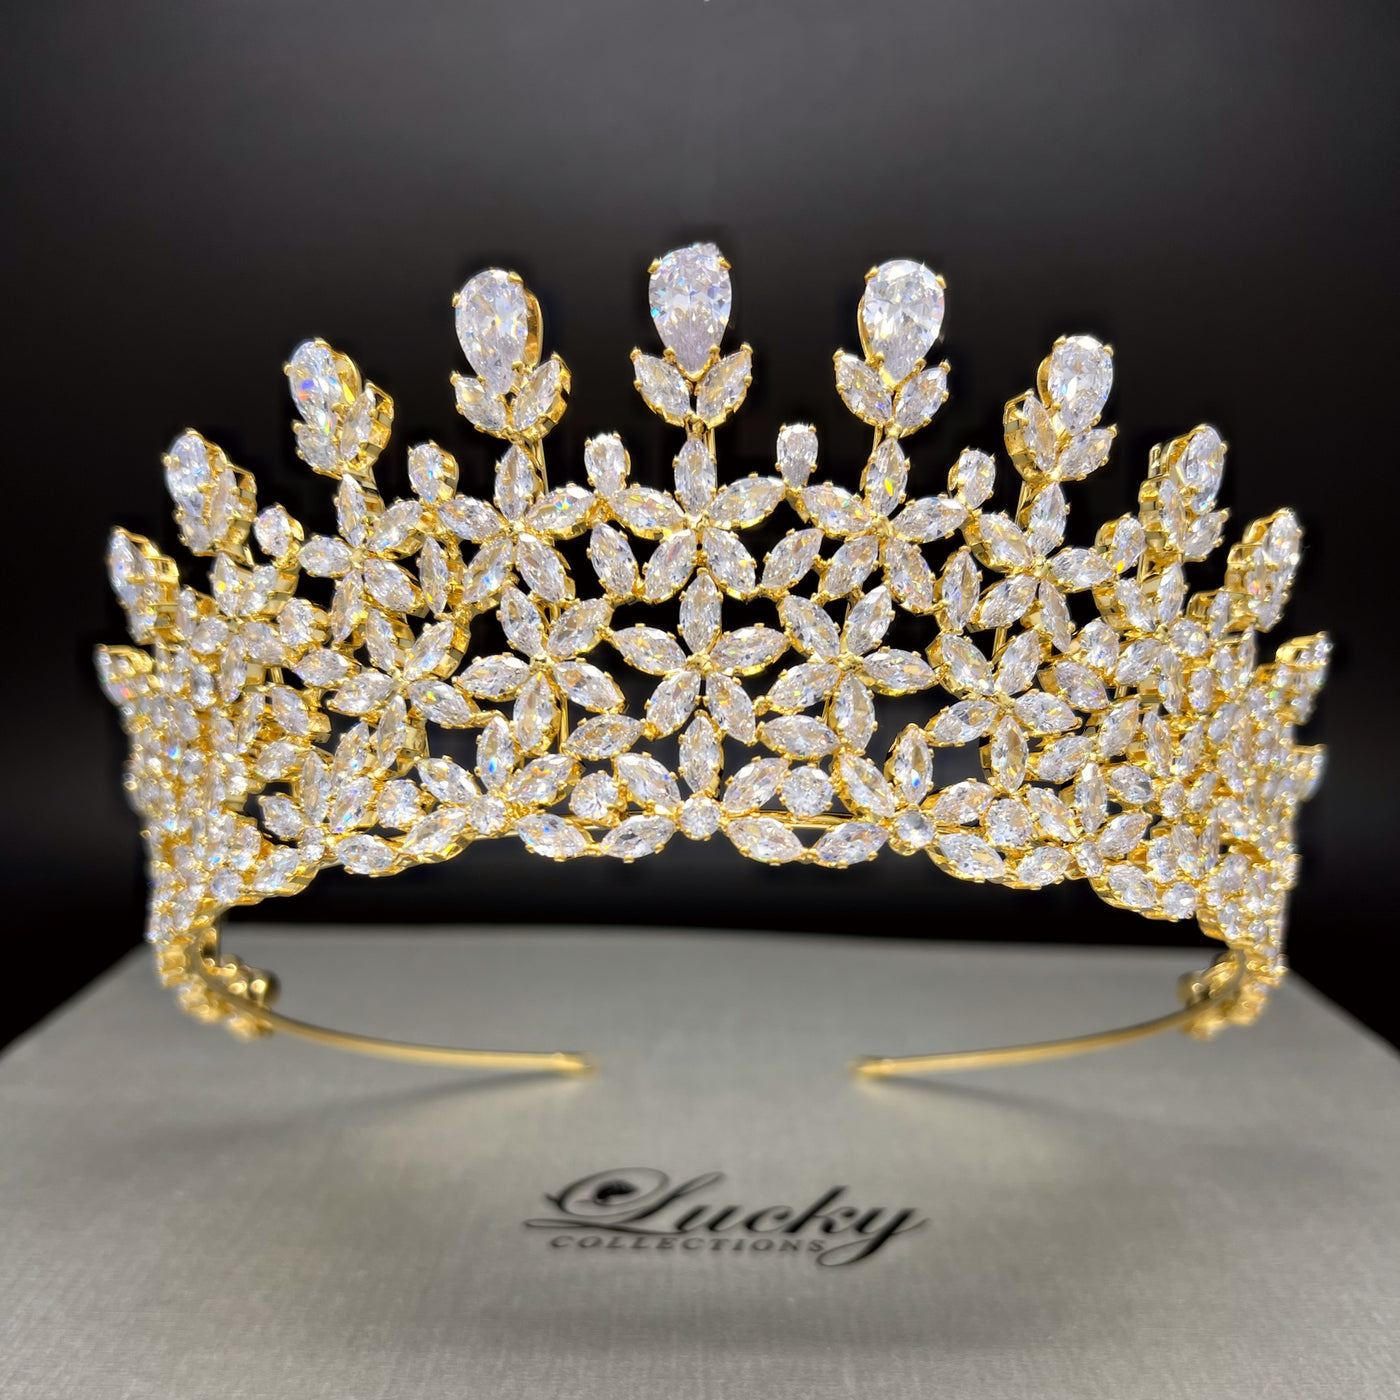 Gold Tiara, Zirconia Gems fit for the Empress within you by Lucky Collections ™